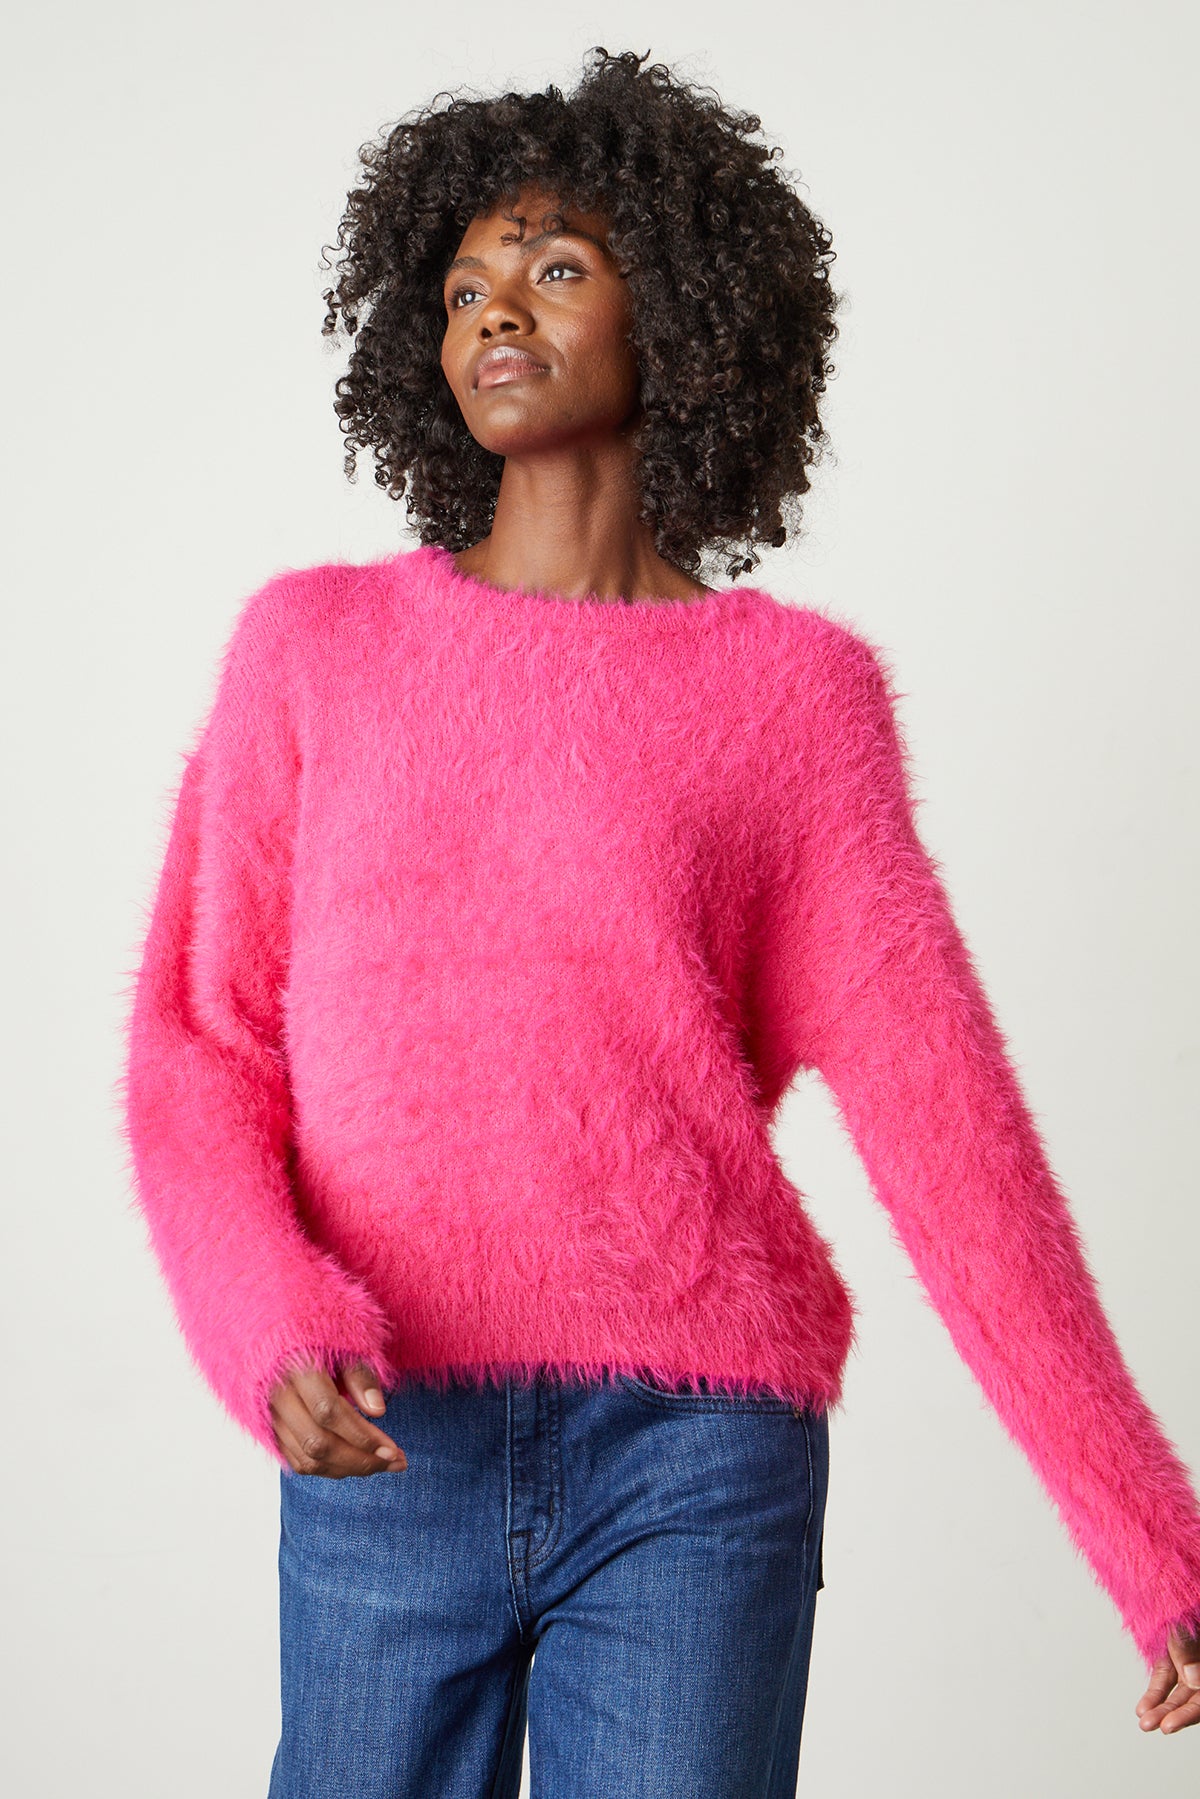 Ray Feather Yarn Crew Neck Sweater in hot pink front-25444377362625